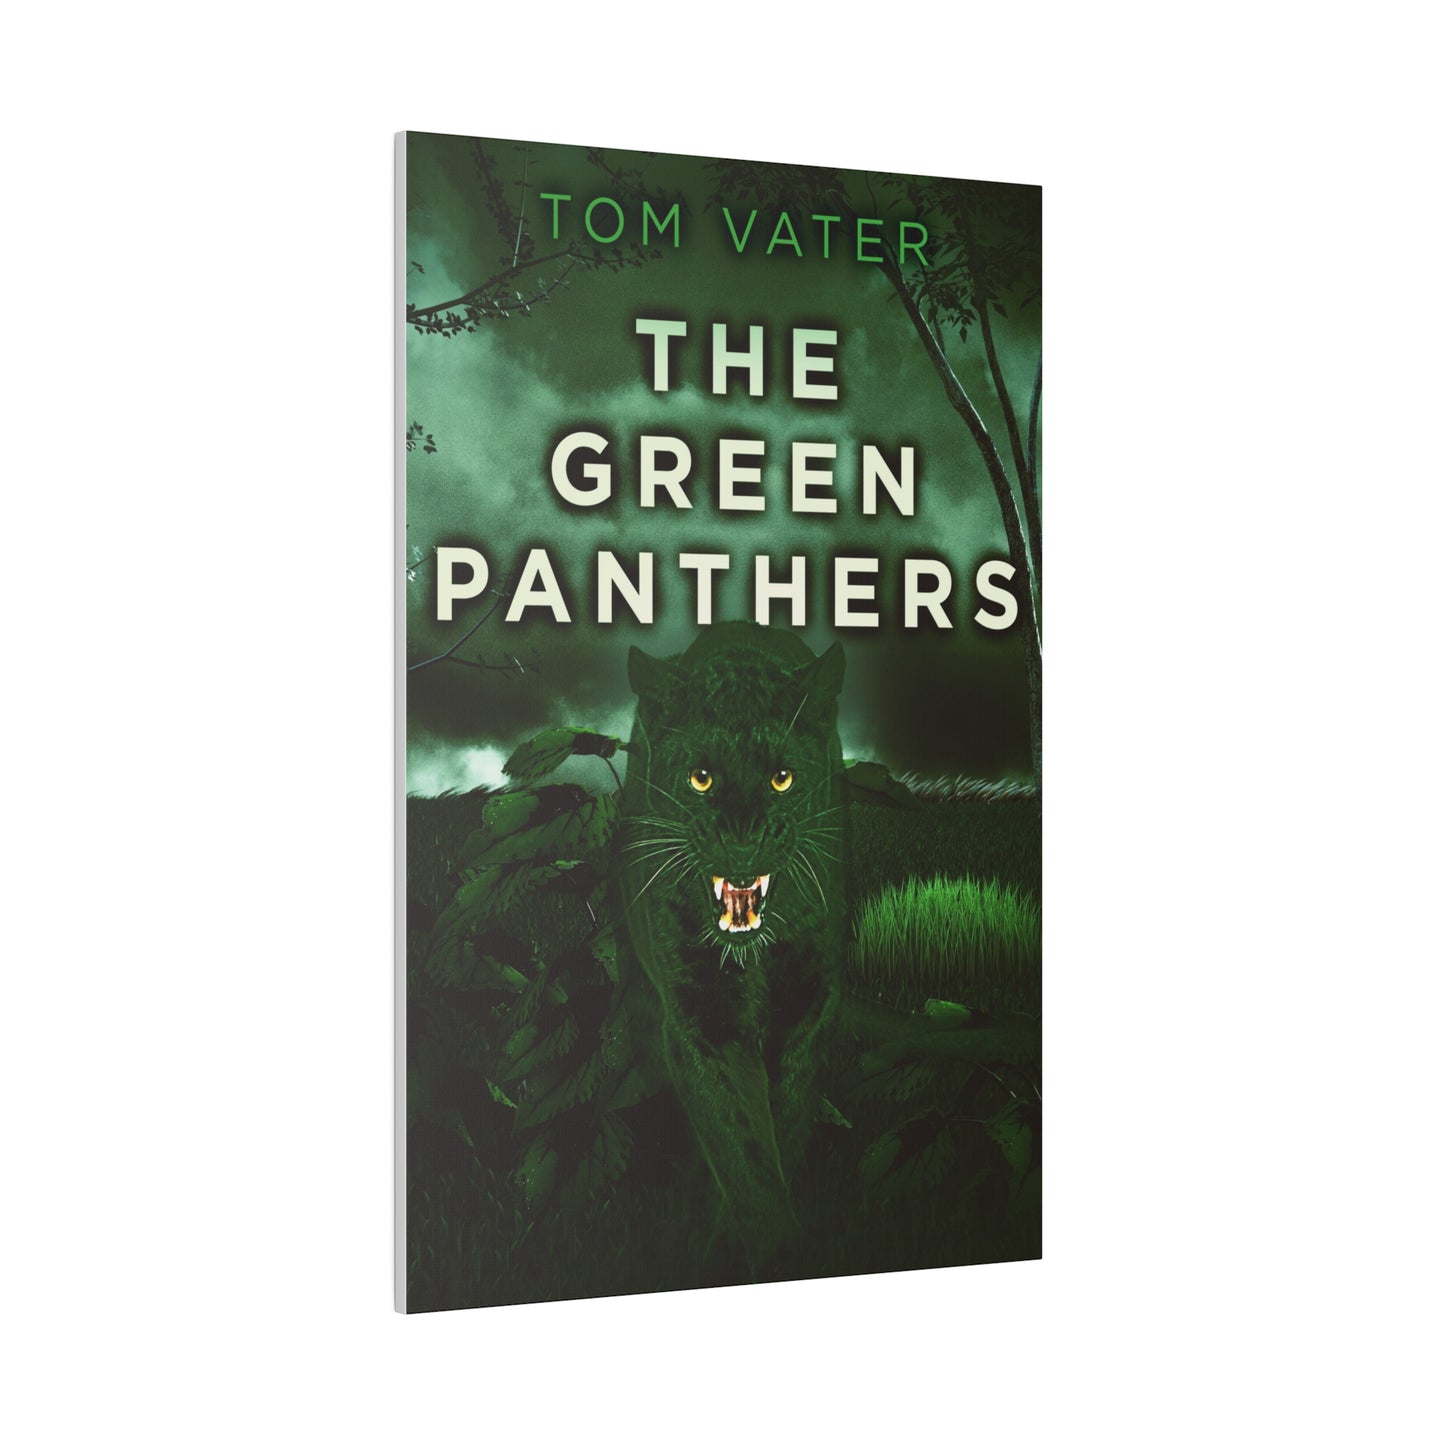 The Green Panthers - Canvas